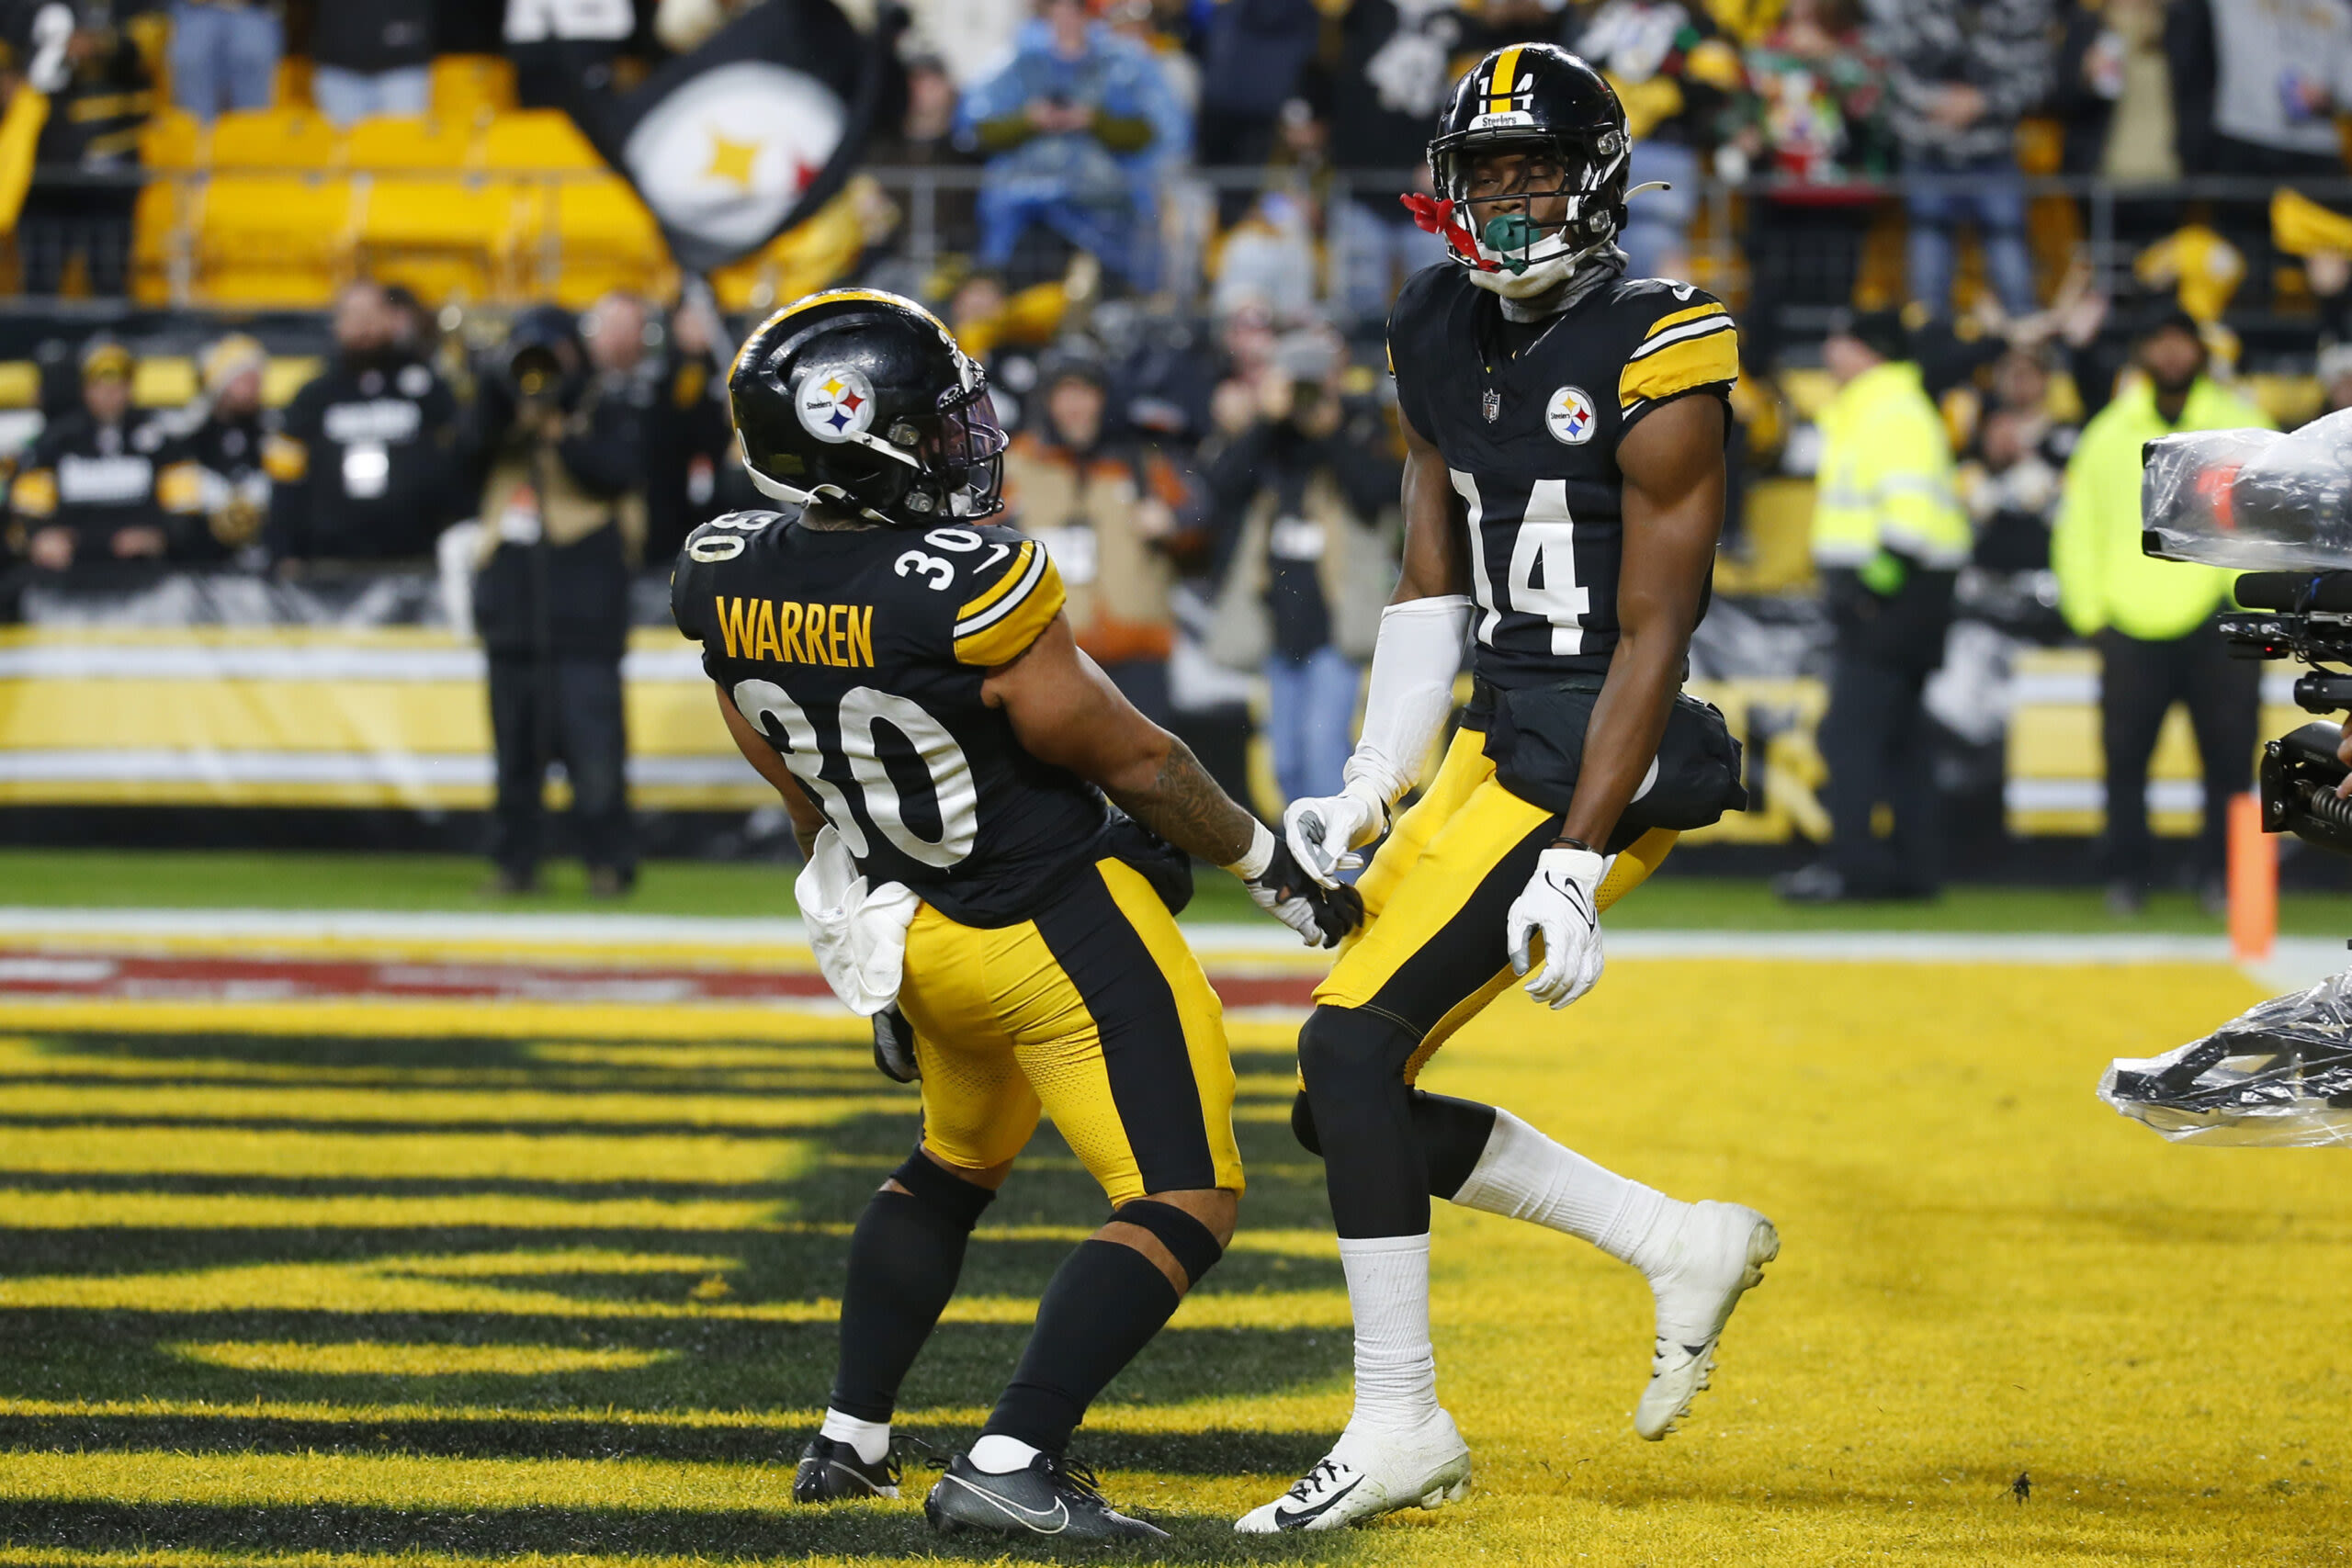 CBS Sports unimpressed by Steelers trio of skill players